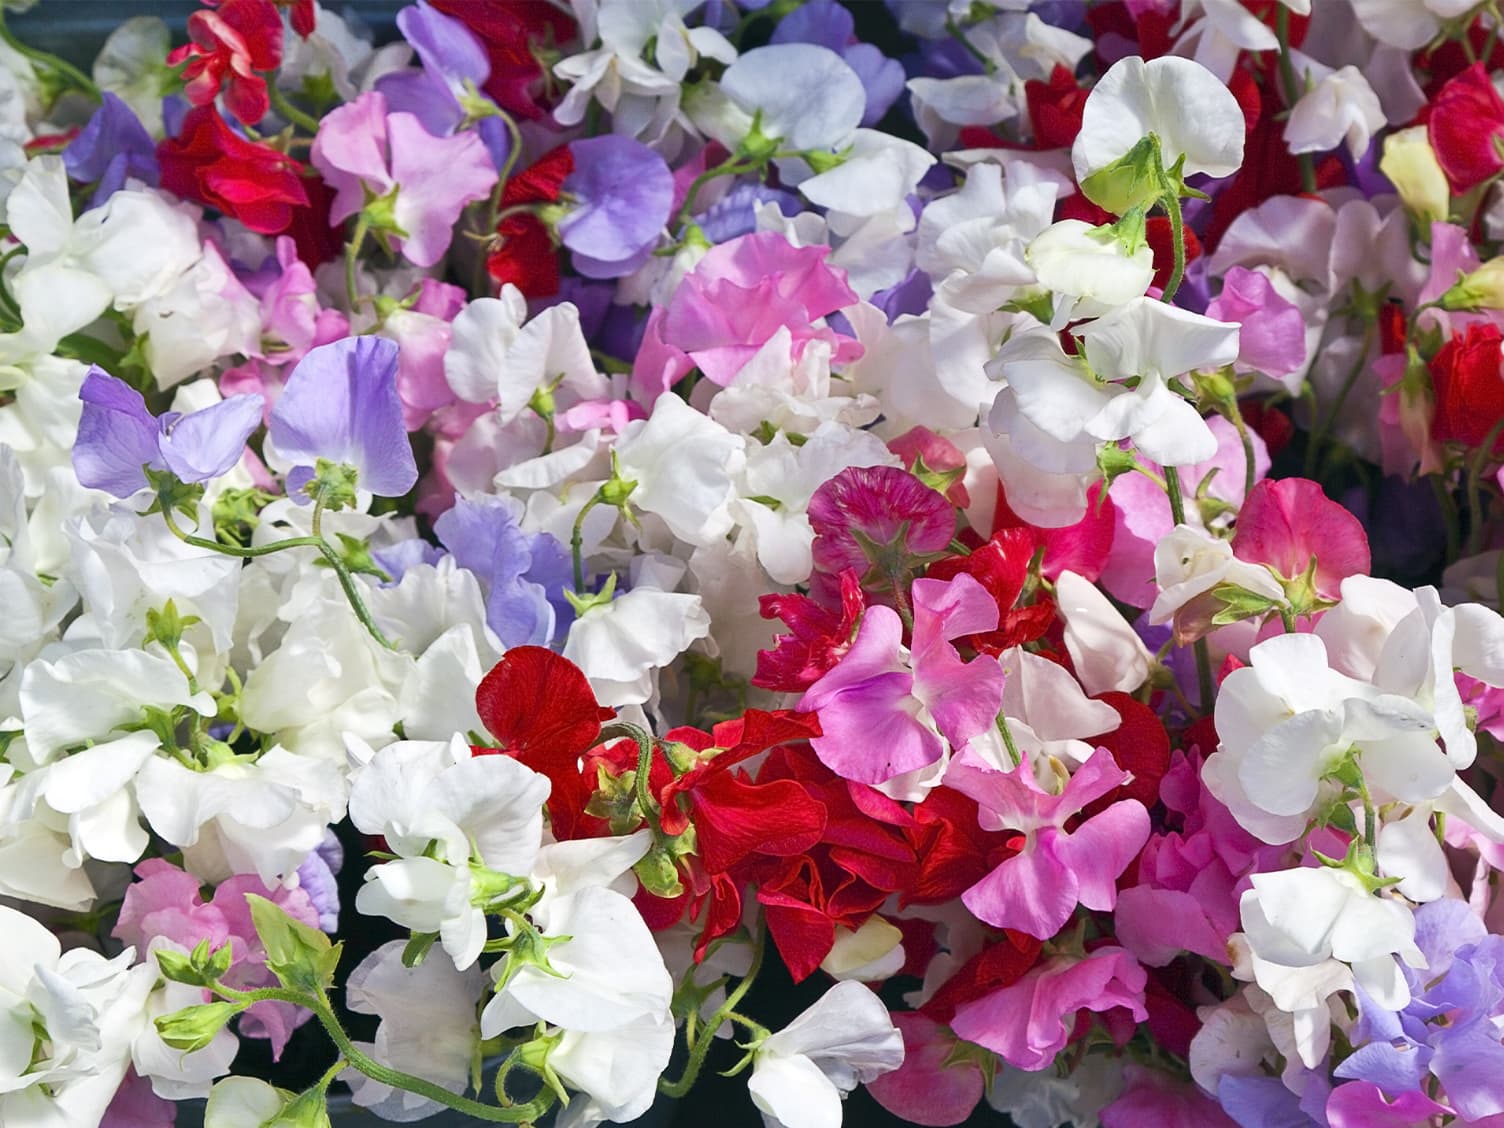 Garden of white, red and purple flowers